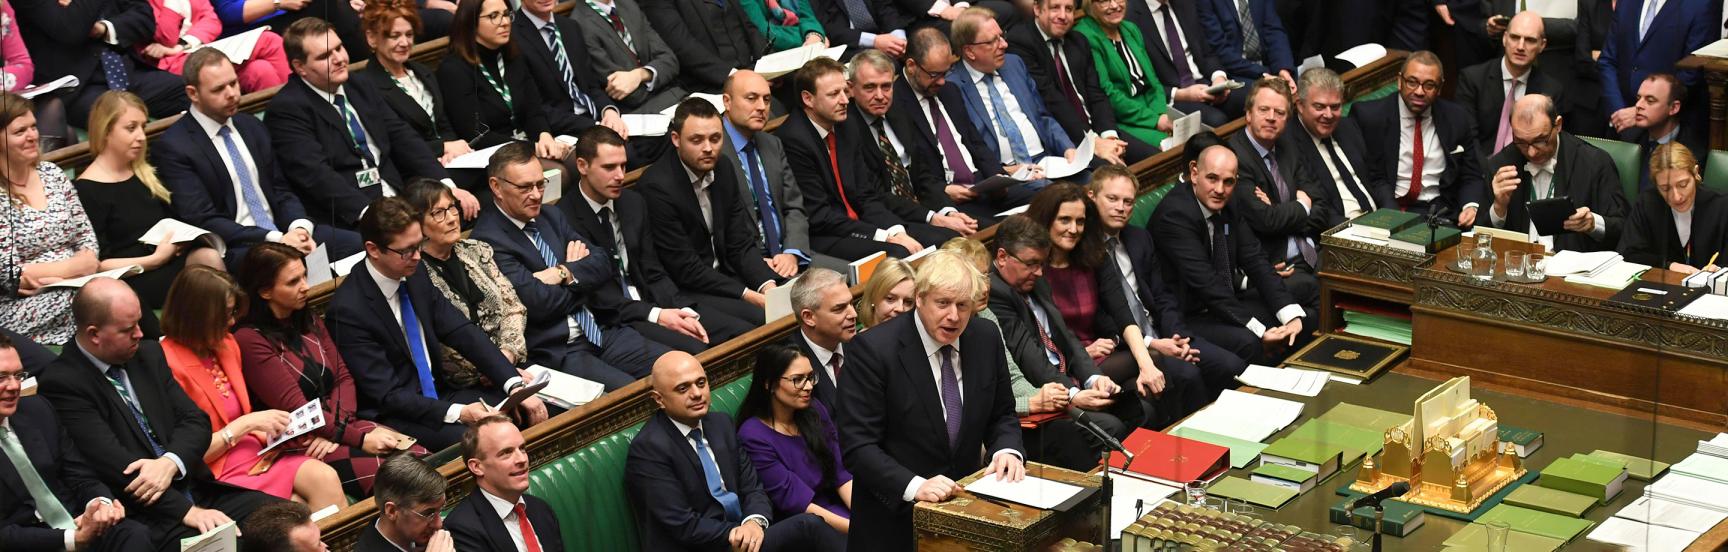 Boris Johnson speaks about his Brexit deal in the House of Commons